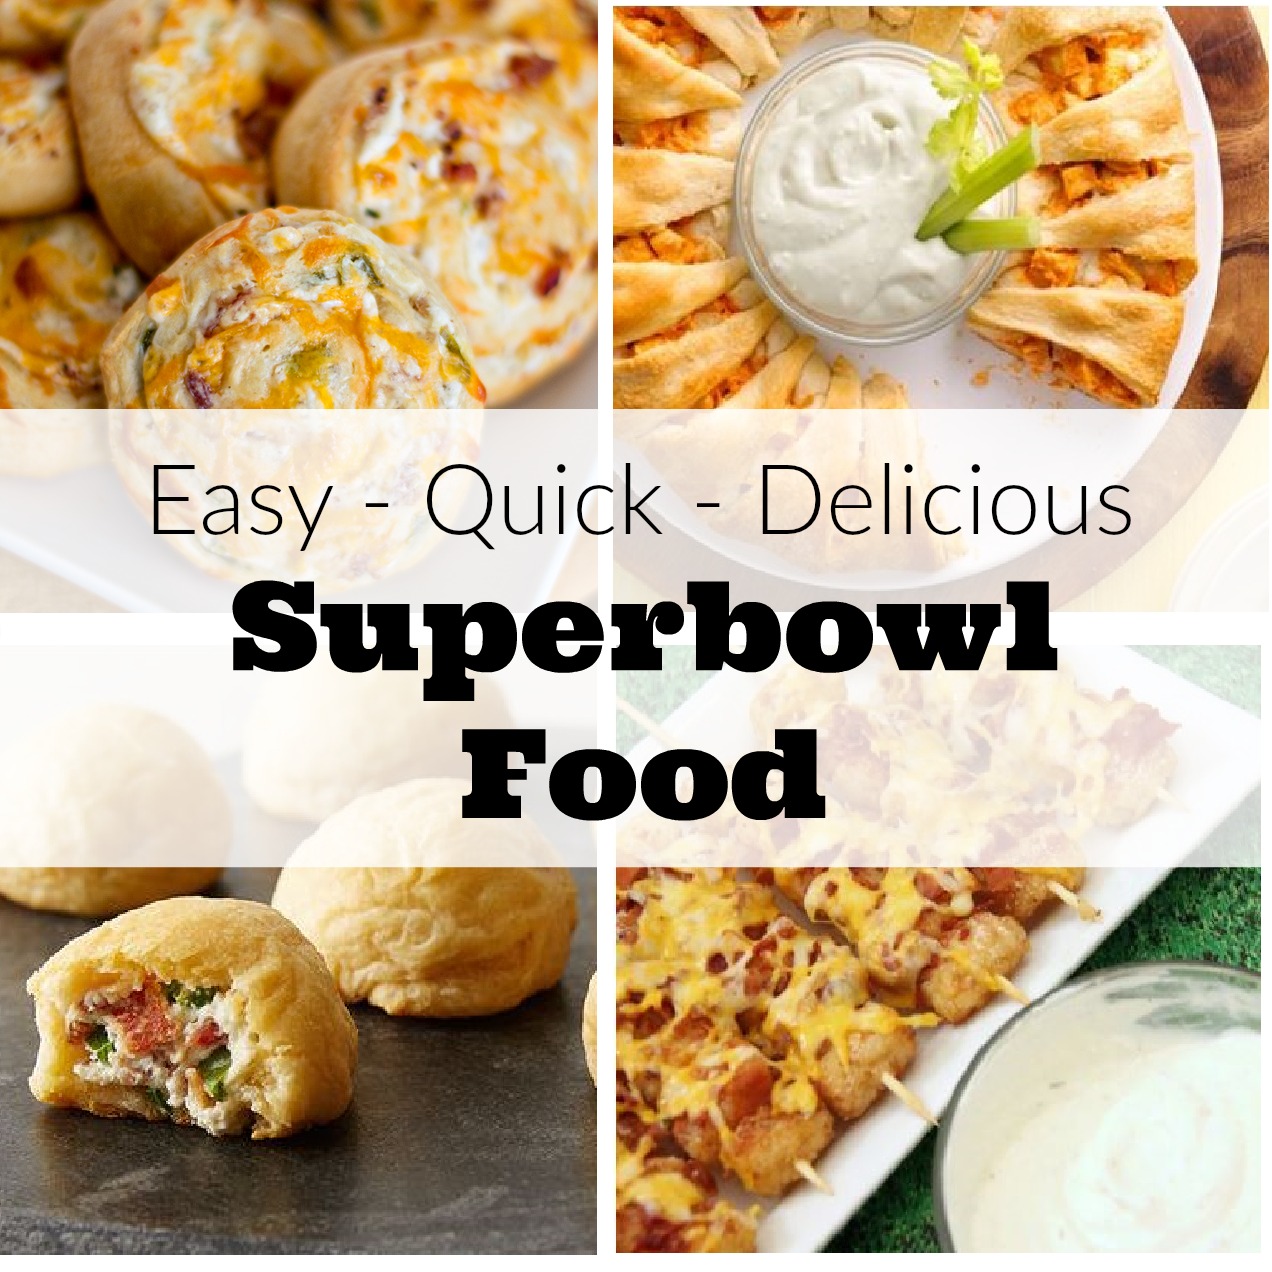 Superbowl Food Ideas That Are Sure To Be a Crowd Pleaser!